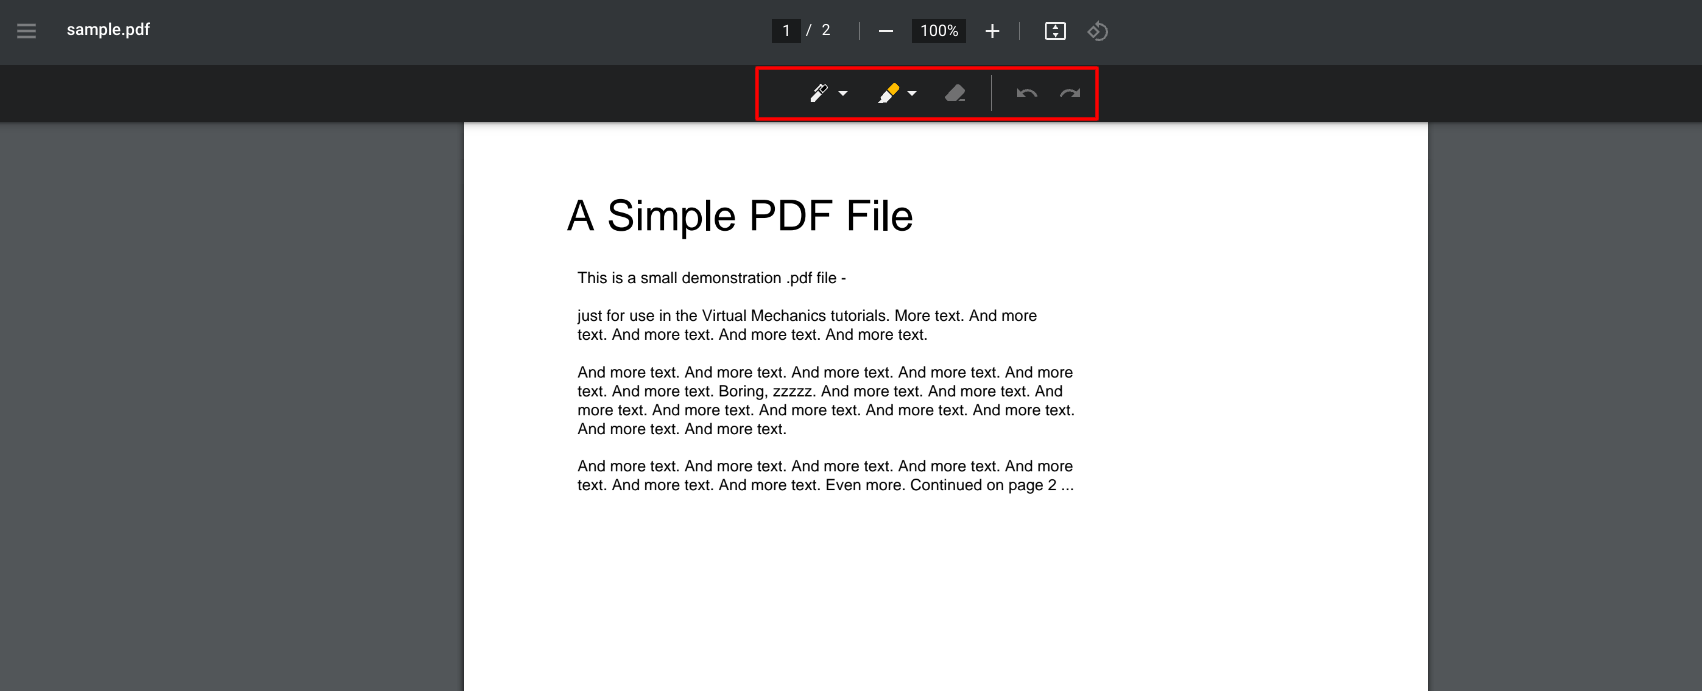 Annotation options in Chrome's PDF viewer